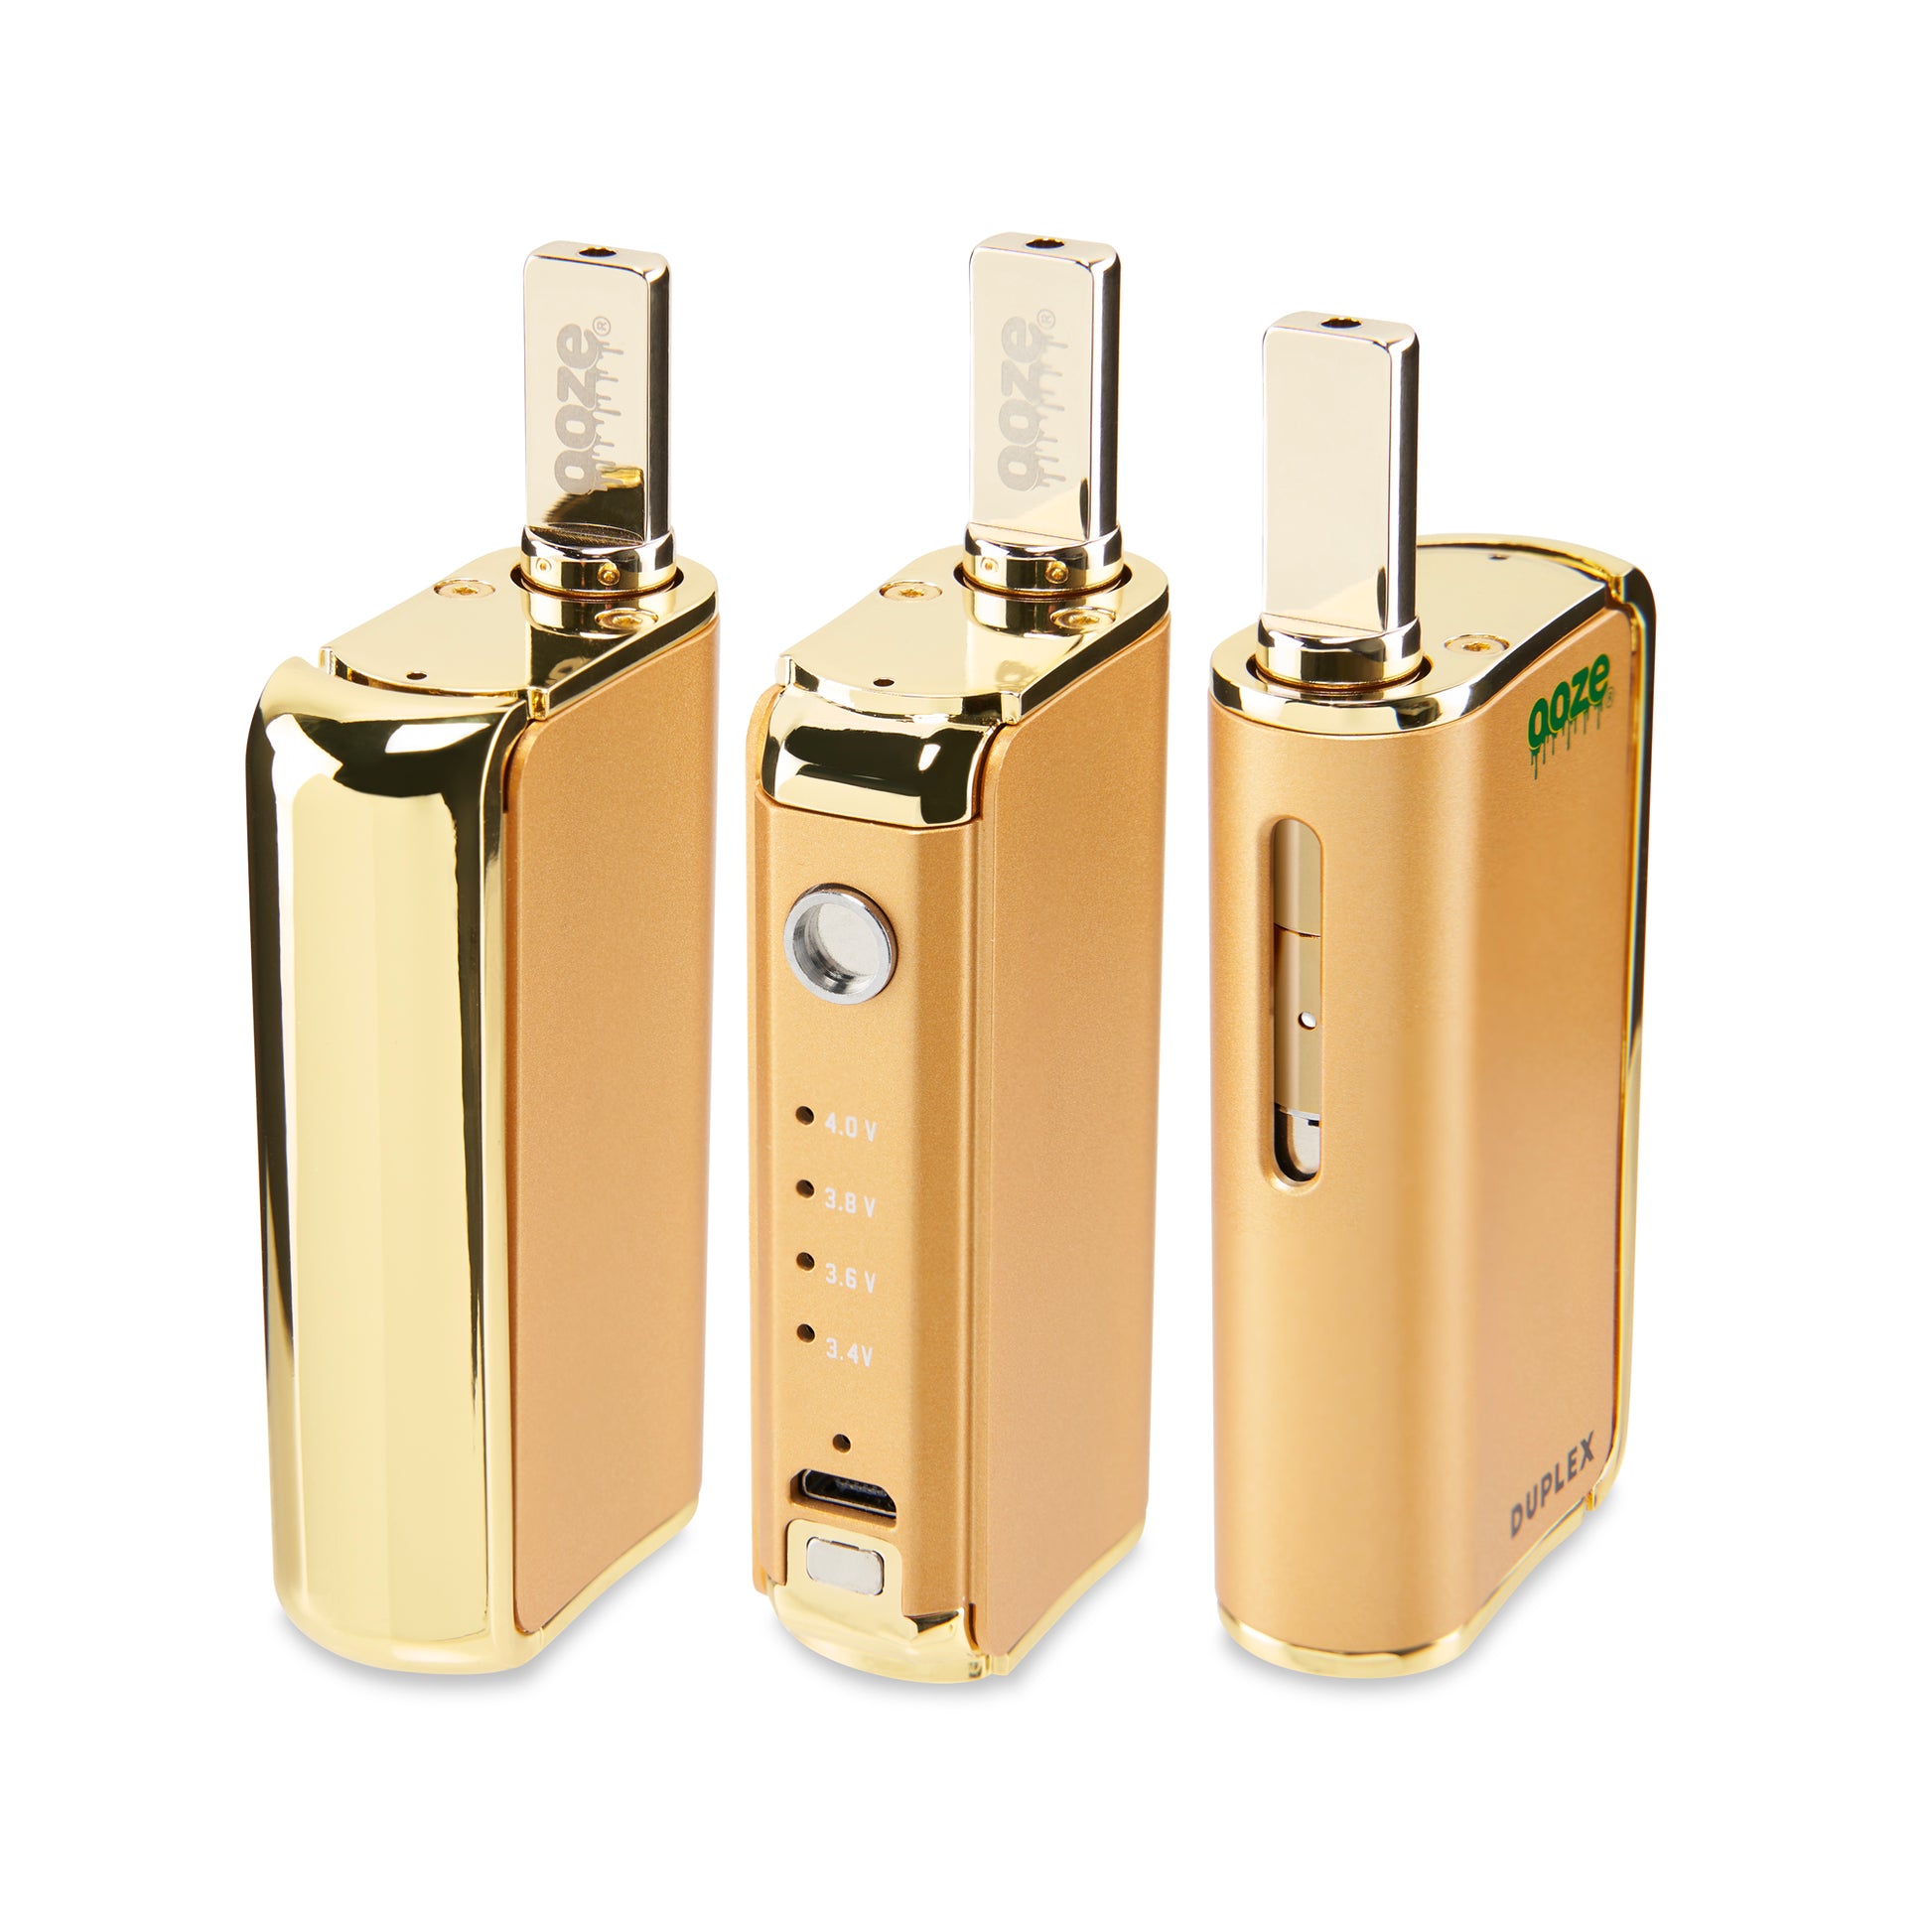 Three of The Lucky Gold Ooze Duplex Pro Vaporizers are in a line on an angle. The left has the magnetic button on, the middle has it off, and the left shows the opposite end of the device.